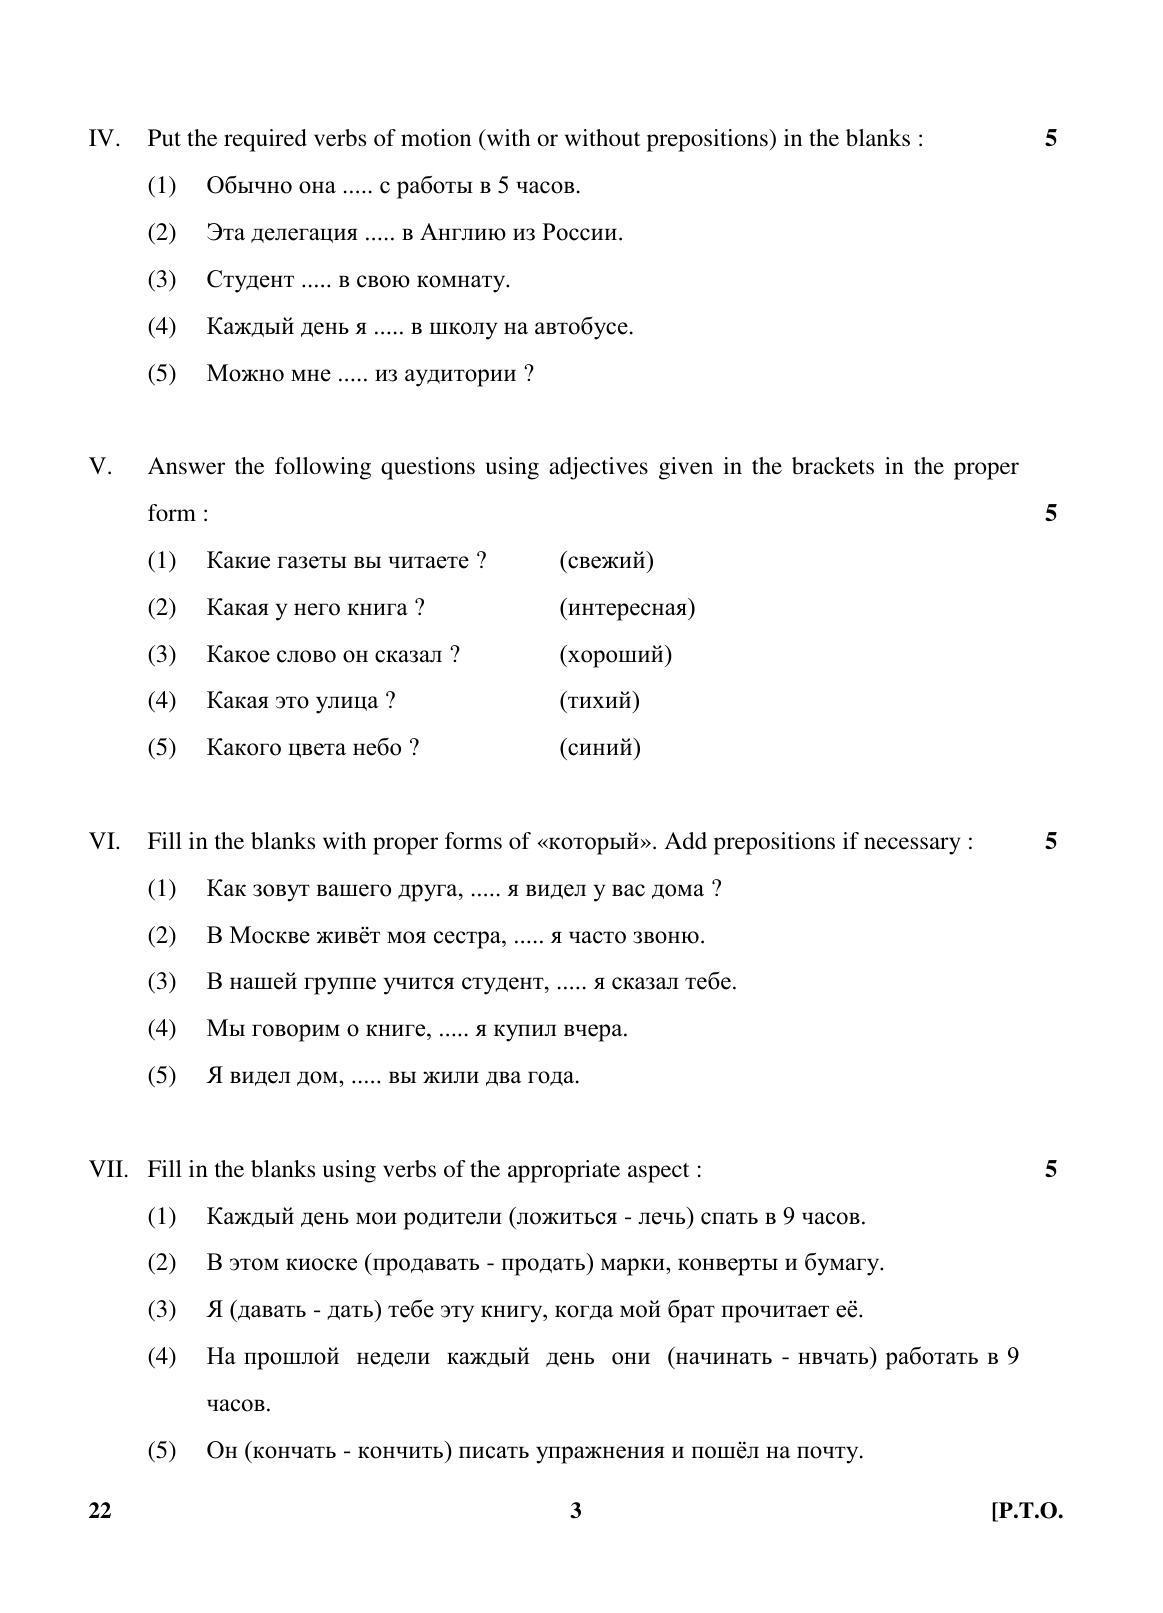 CBSE Class 10 22 (Russian) 2018 Question Paper - Page 3